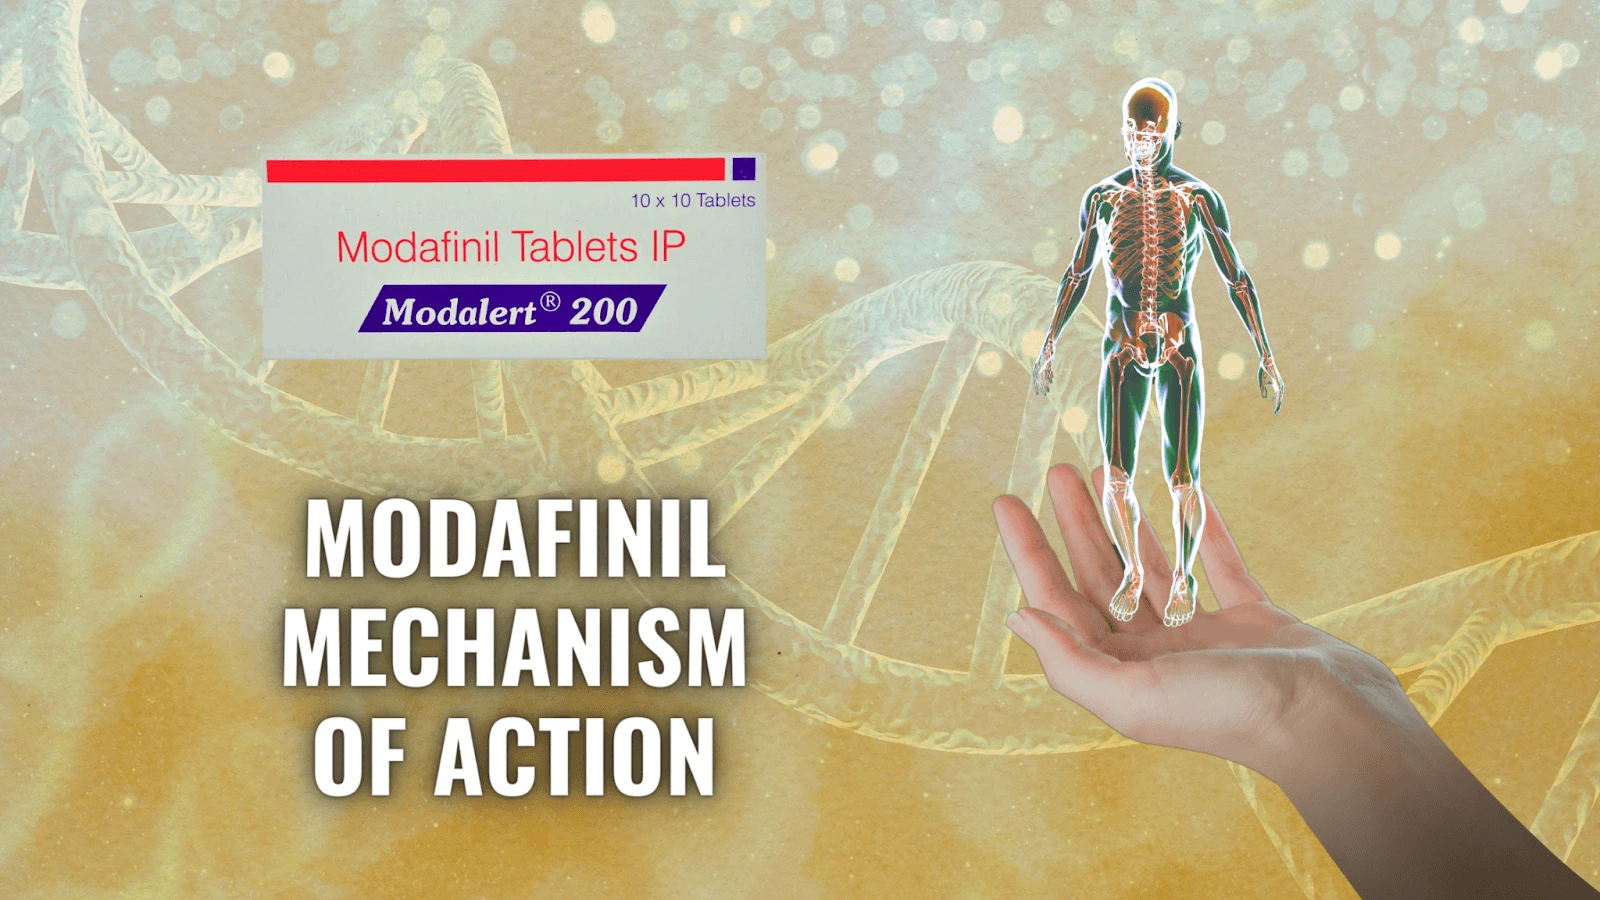 Modafinil Mechanism Of Action: Its Effects On The Brain